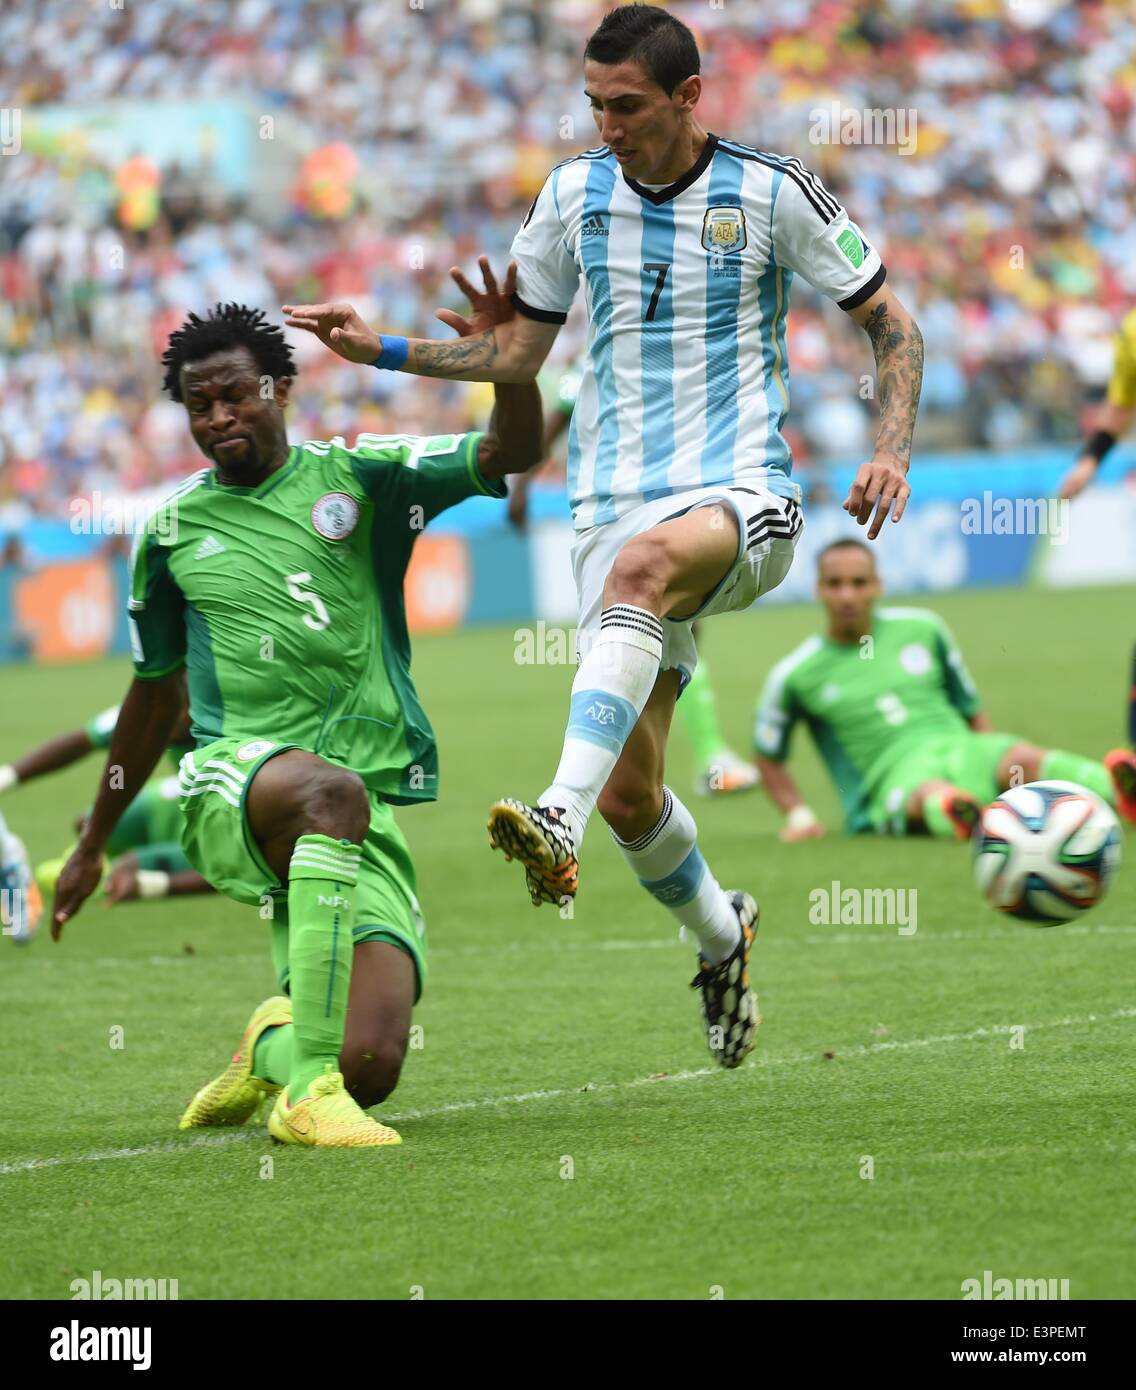 Porto Alegre, Brazil. 25th June, 2014. Argentina's Angel Di Maria (R, front) vies with Nigeria's Efe Ambrose during a Group F match between Nigeria and Argentina of 2014 FIFA World Cup at the Estadio Beira-Rio Stadium in Porto Alegre, Brazil, on June 25, 2014. © Li Ga/Xinhua/Alamy Live News Stock Photo